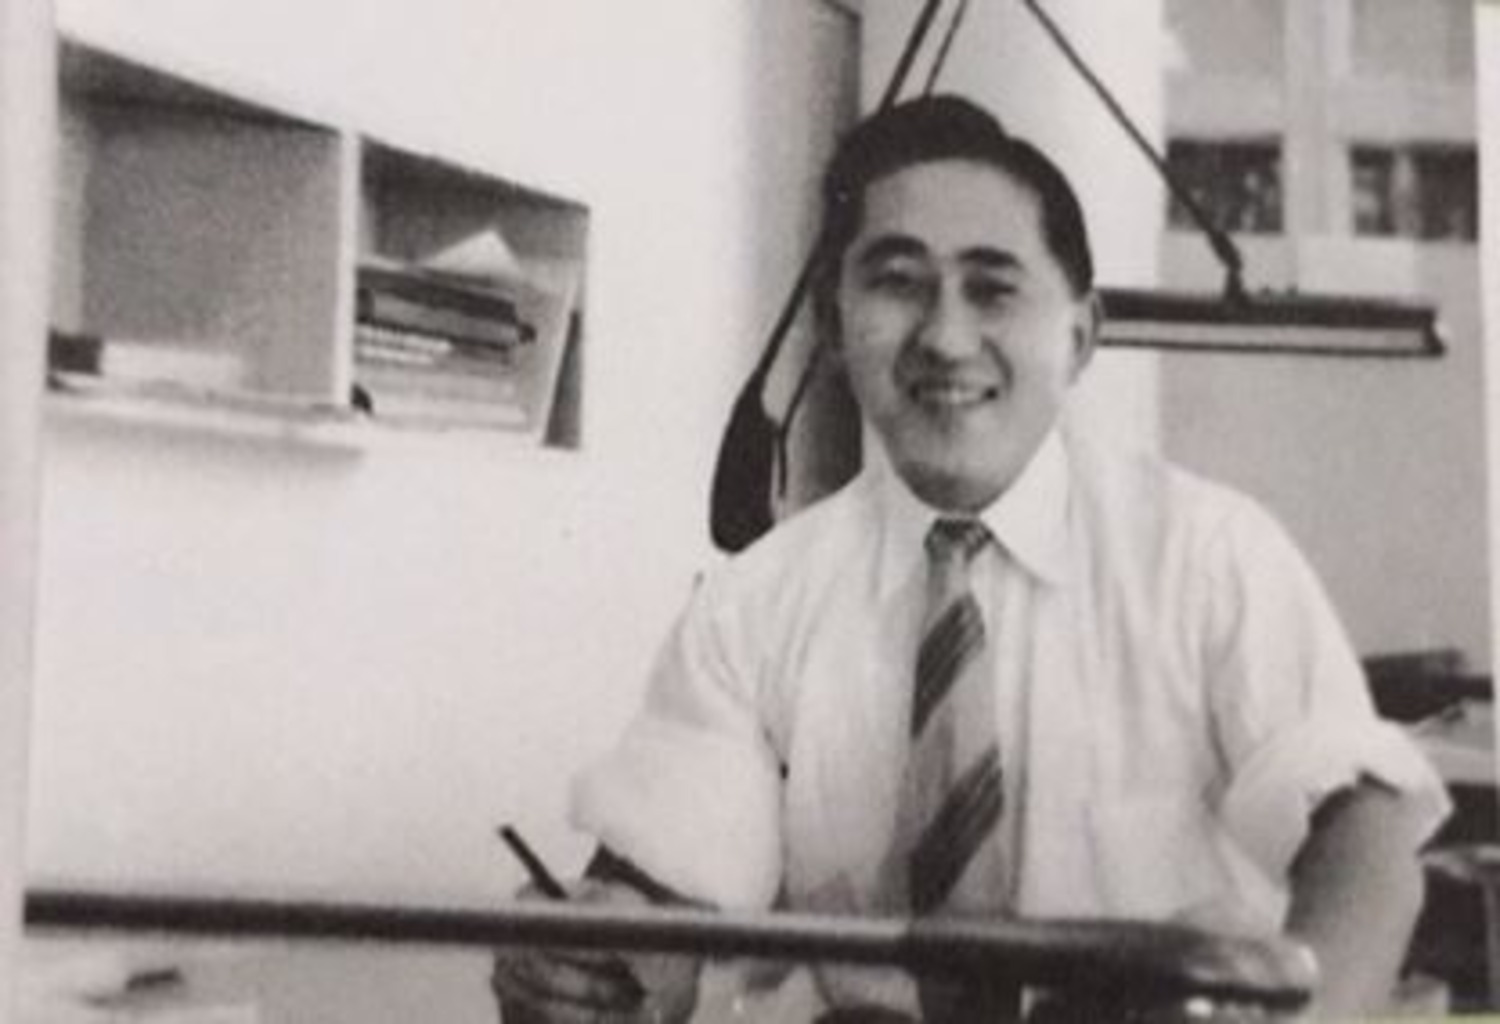 Image shows a smiling man with a tie, holding a pencil over a desk.